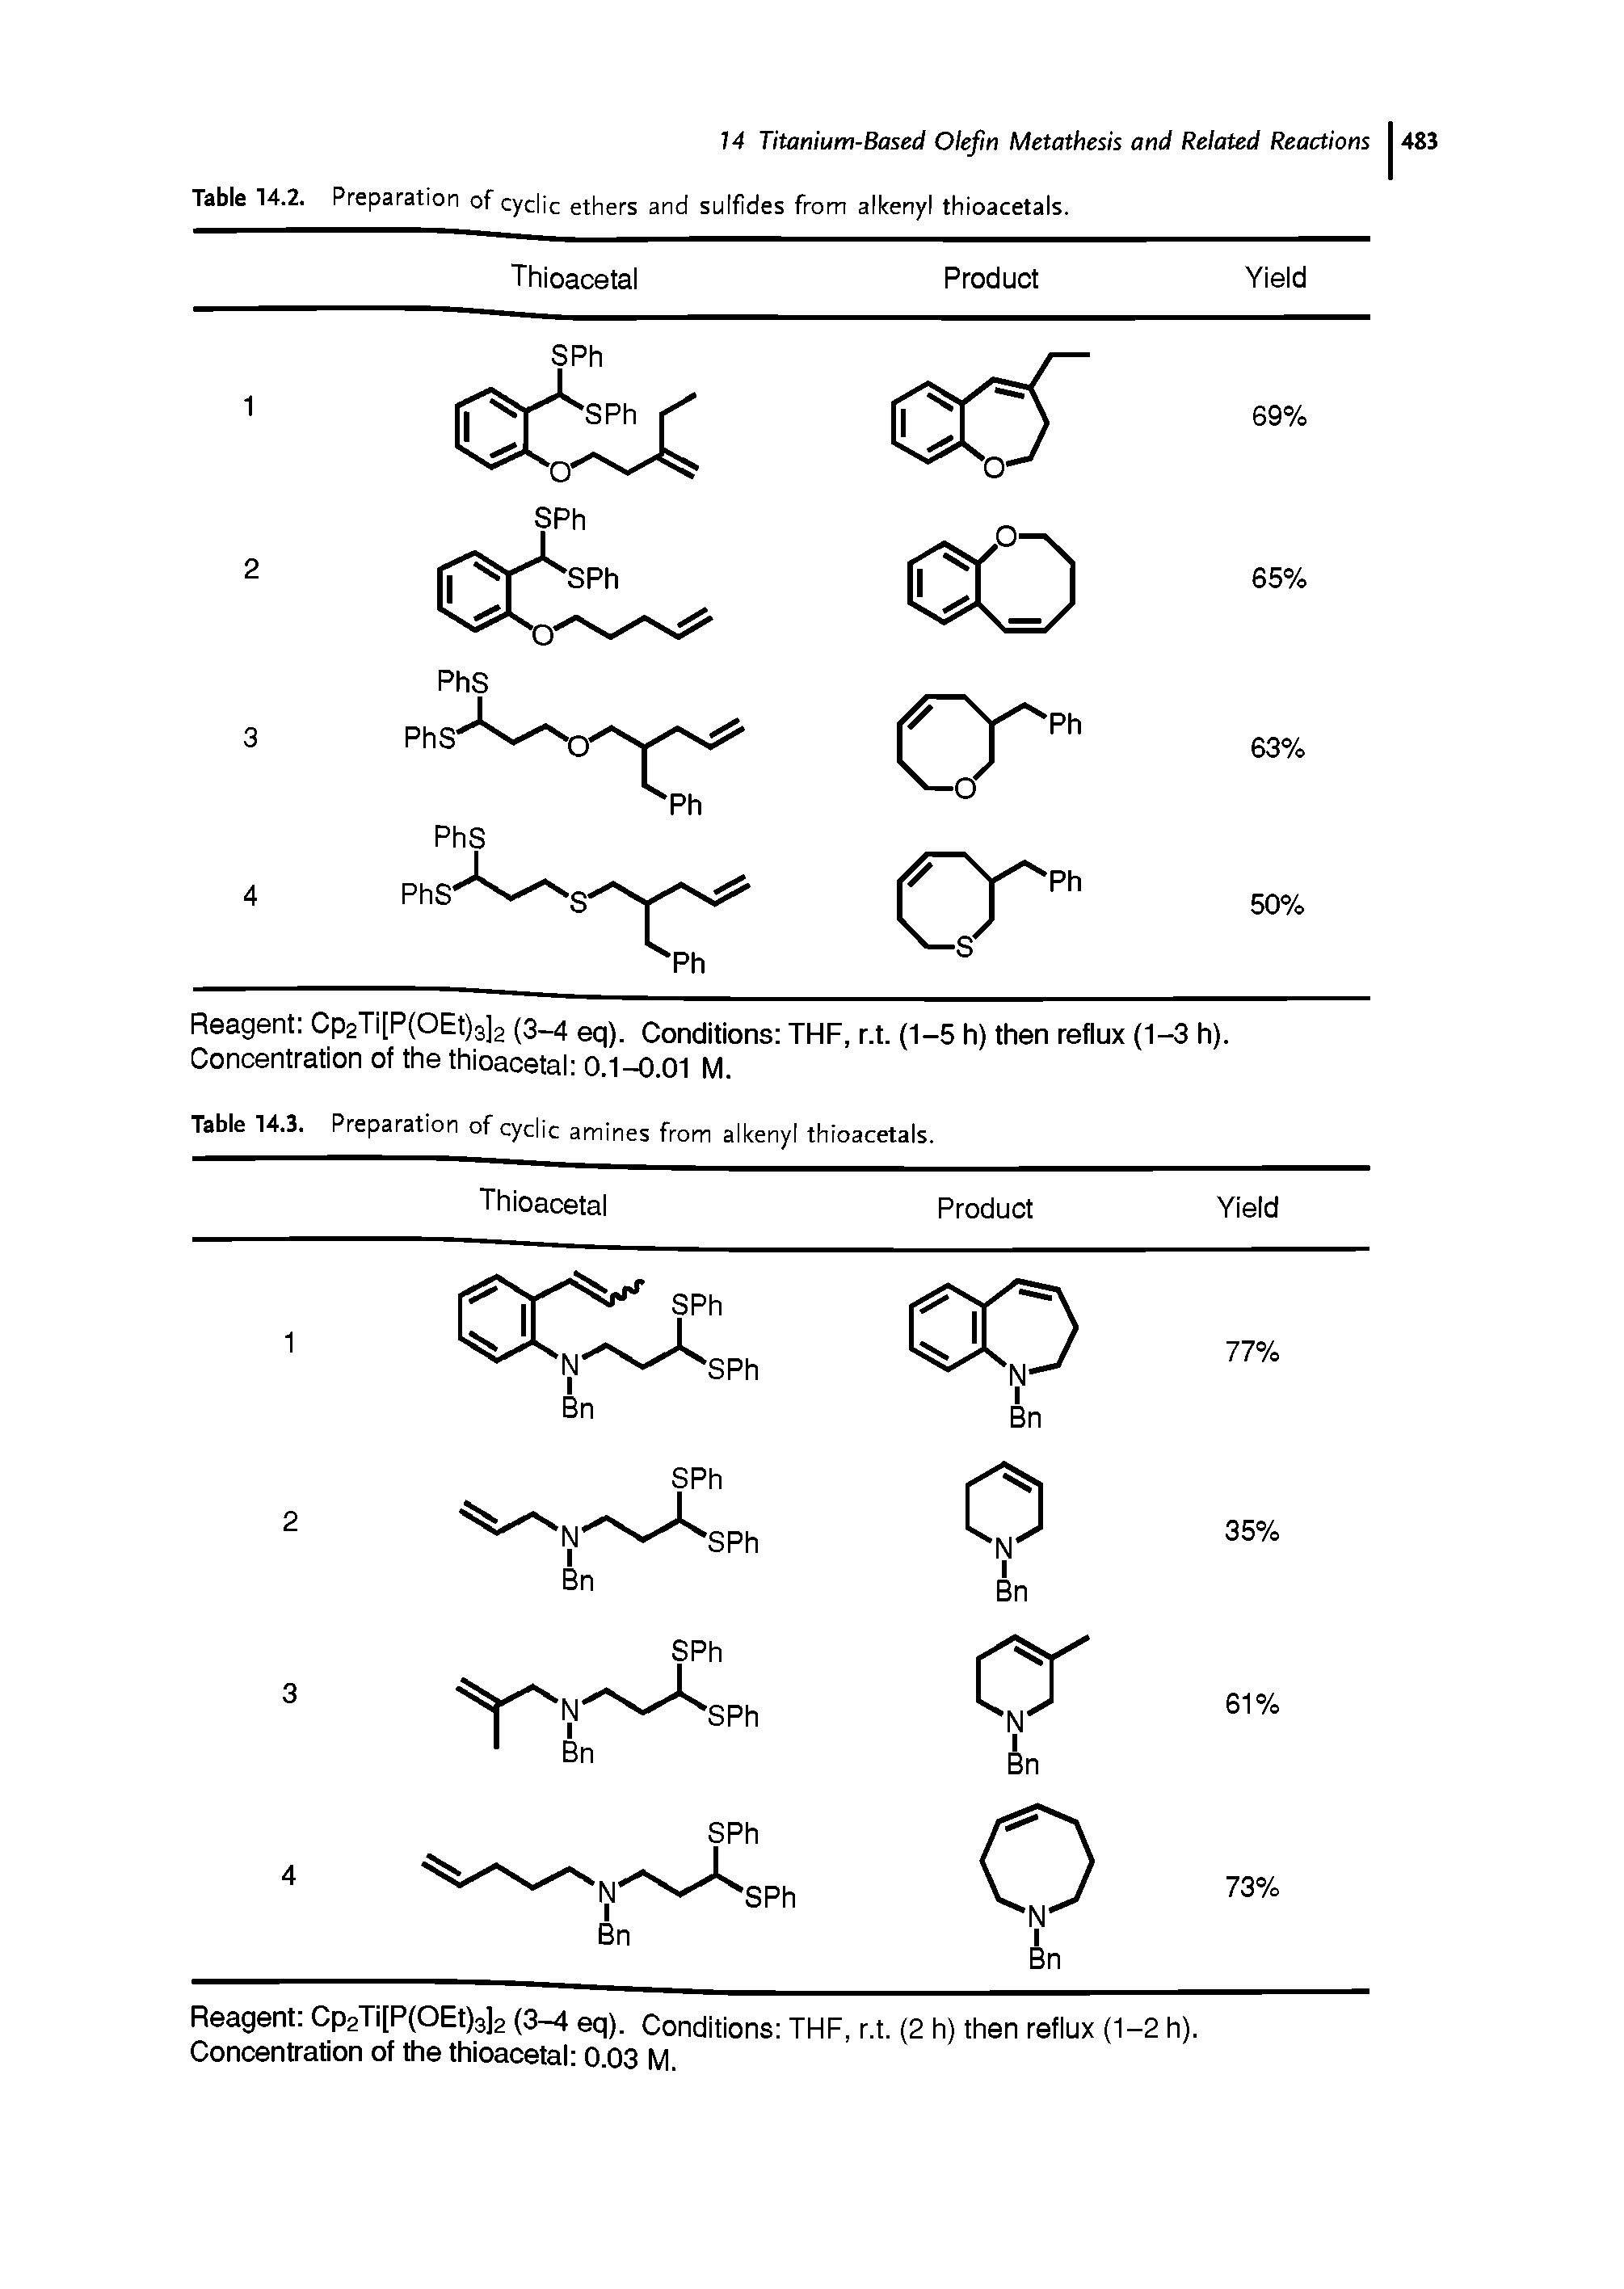 Table 14.2. Preparation of cyclic ethers and sulfides from alkenyl thioacetals. ...